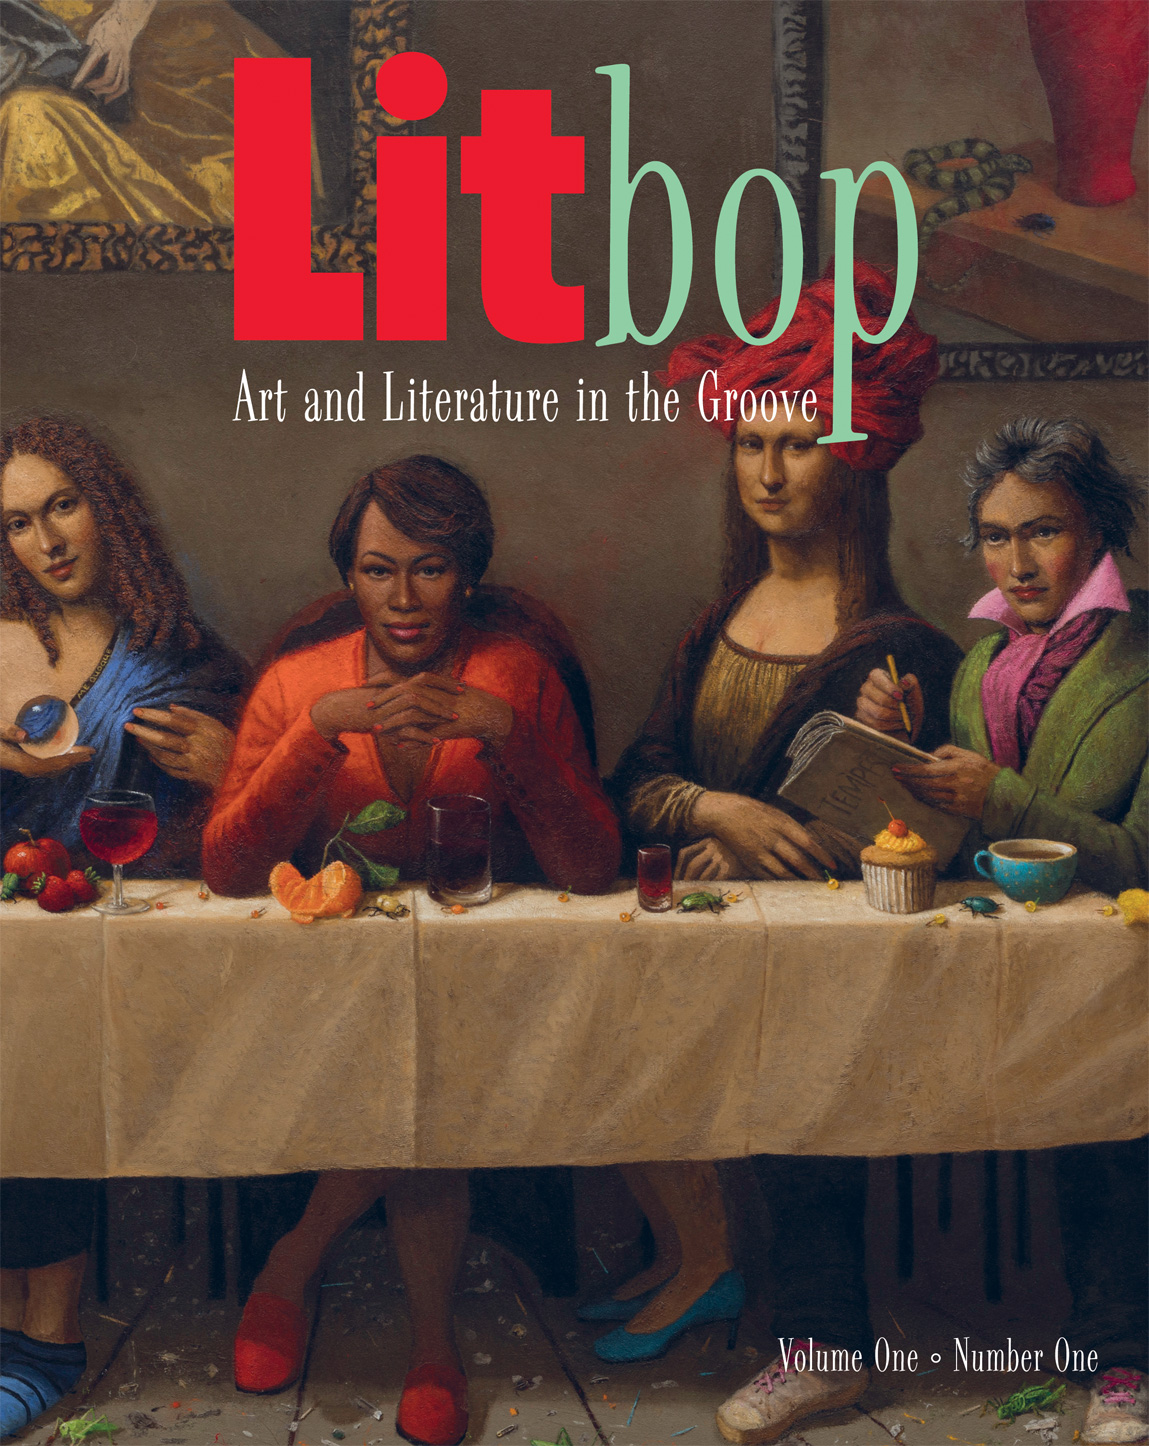 Publisher Thrilling Tales Releases Its First Literary Journal, “Litbop, Art and Literature in the Groove”